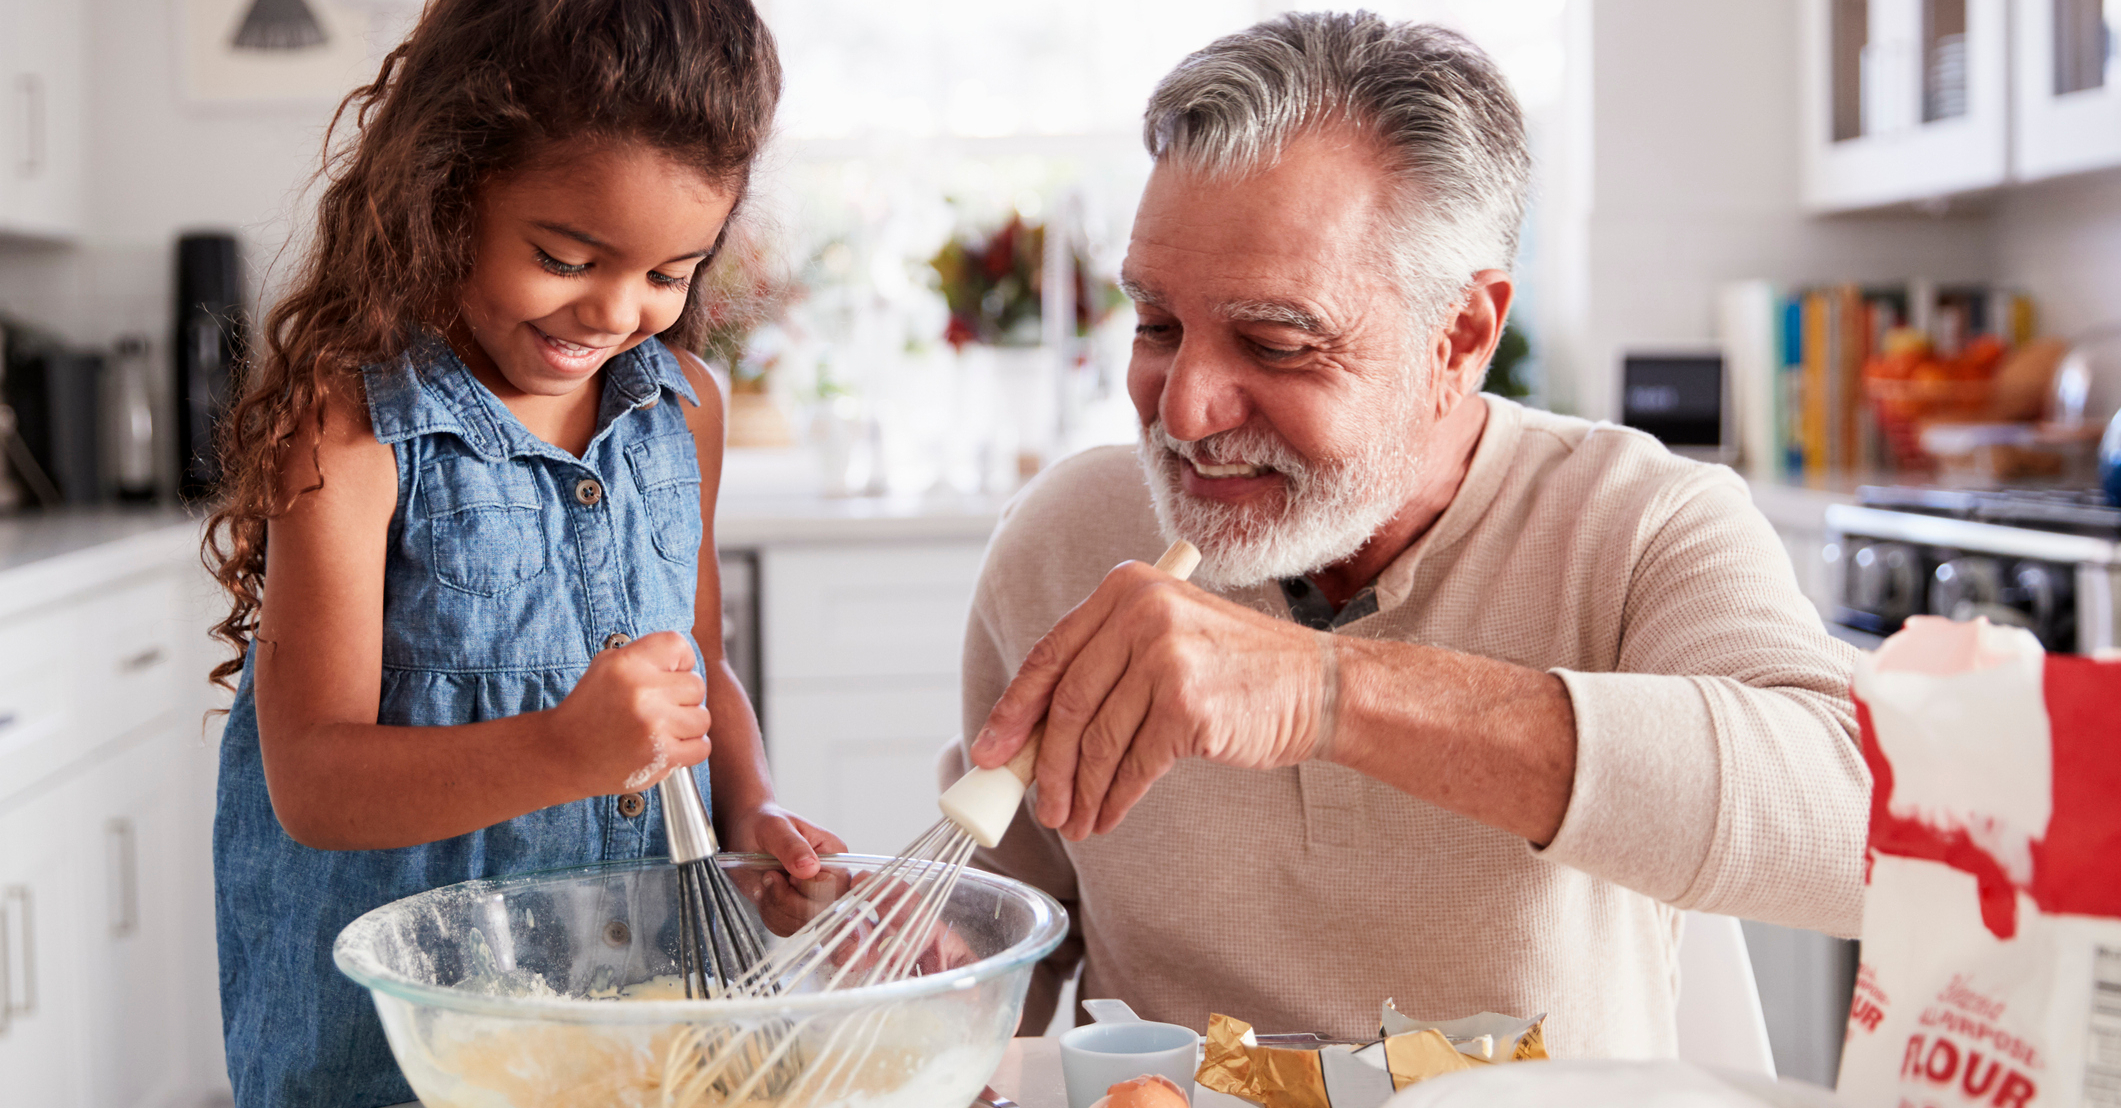 5 Ways to Be an Involved Grandparent Without Overdoing It